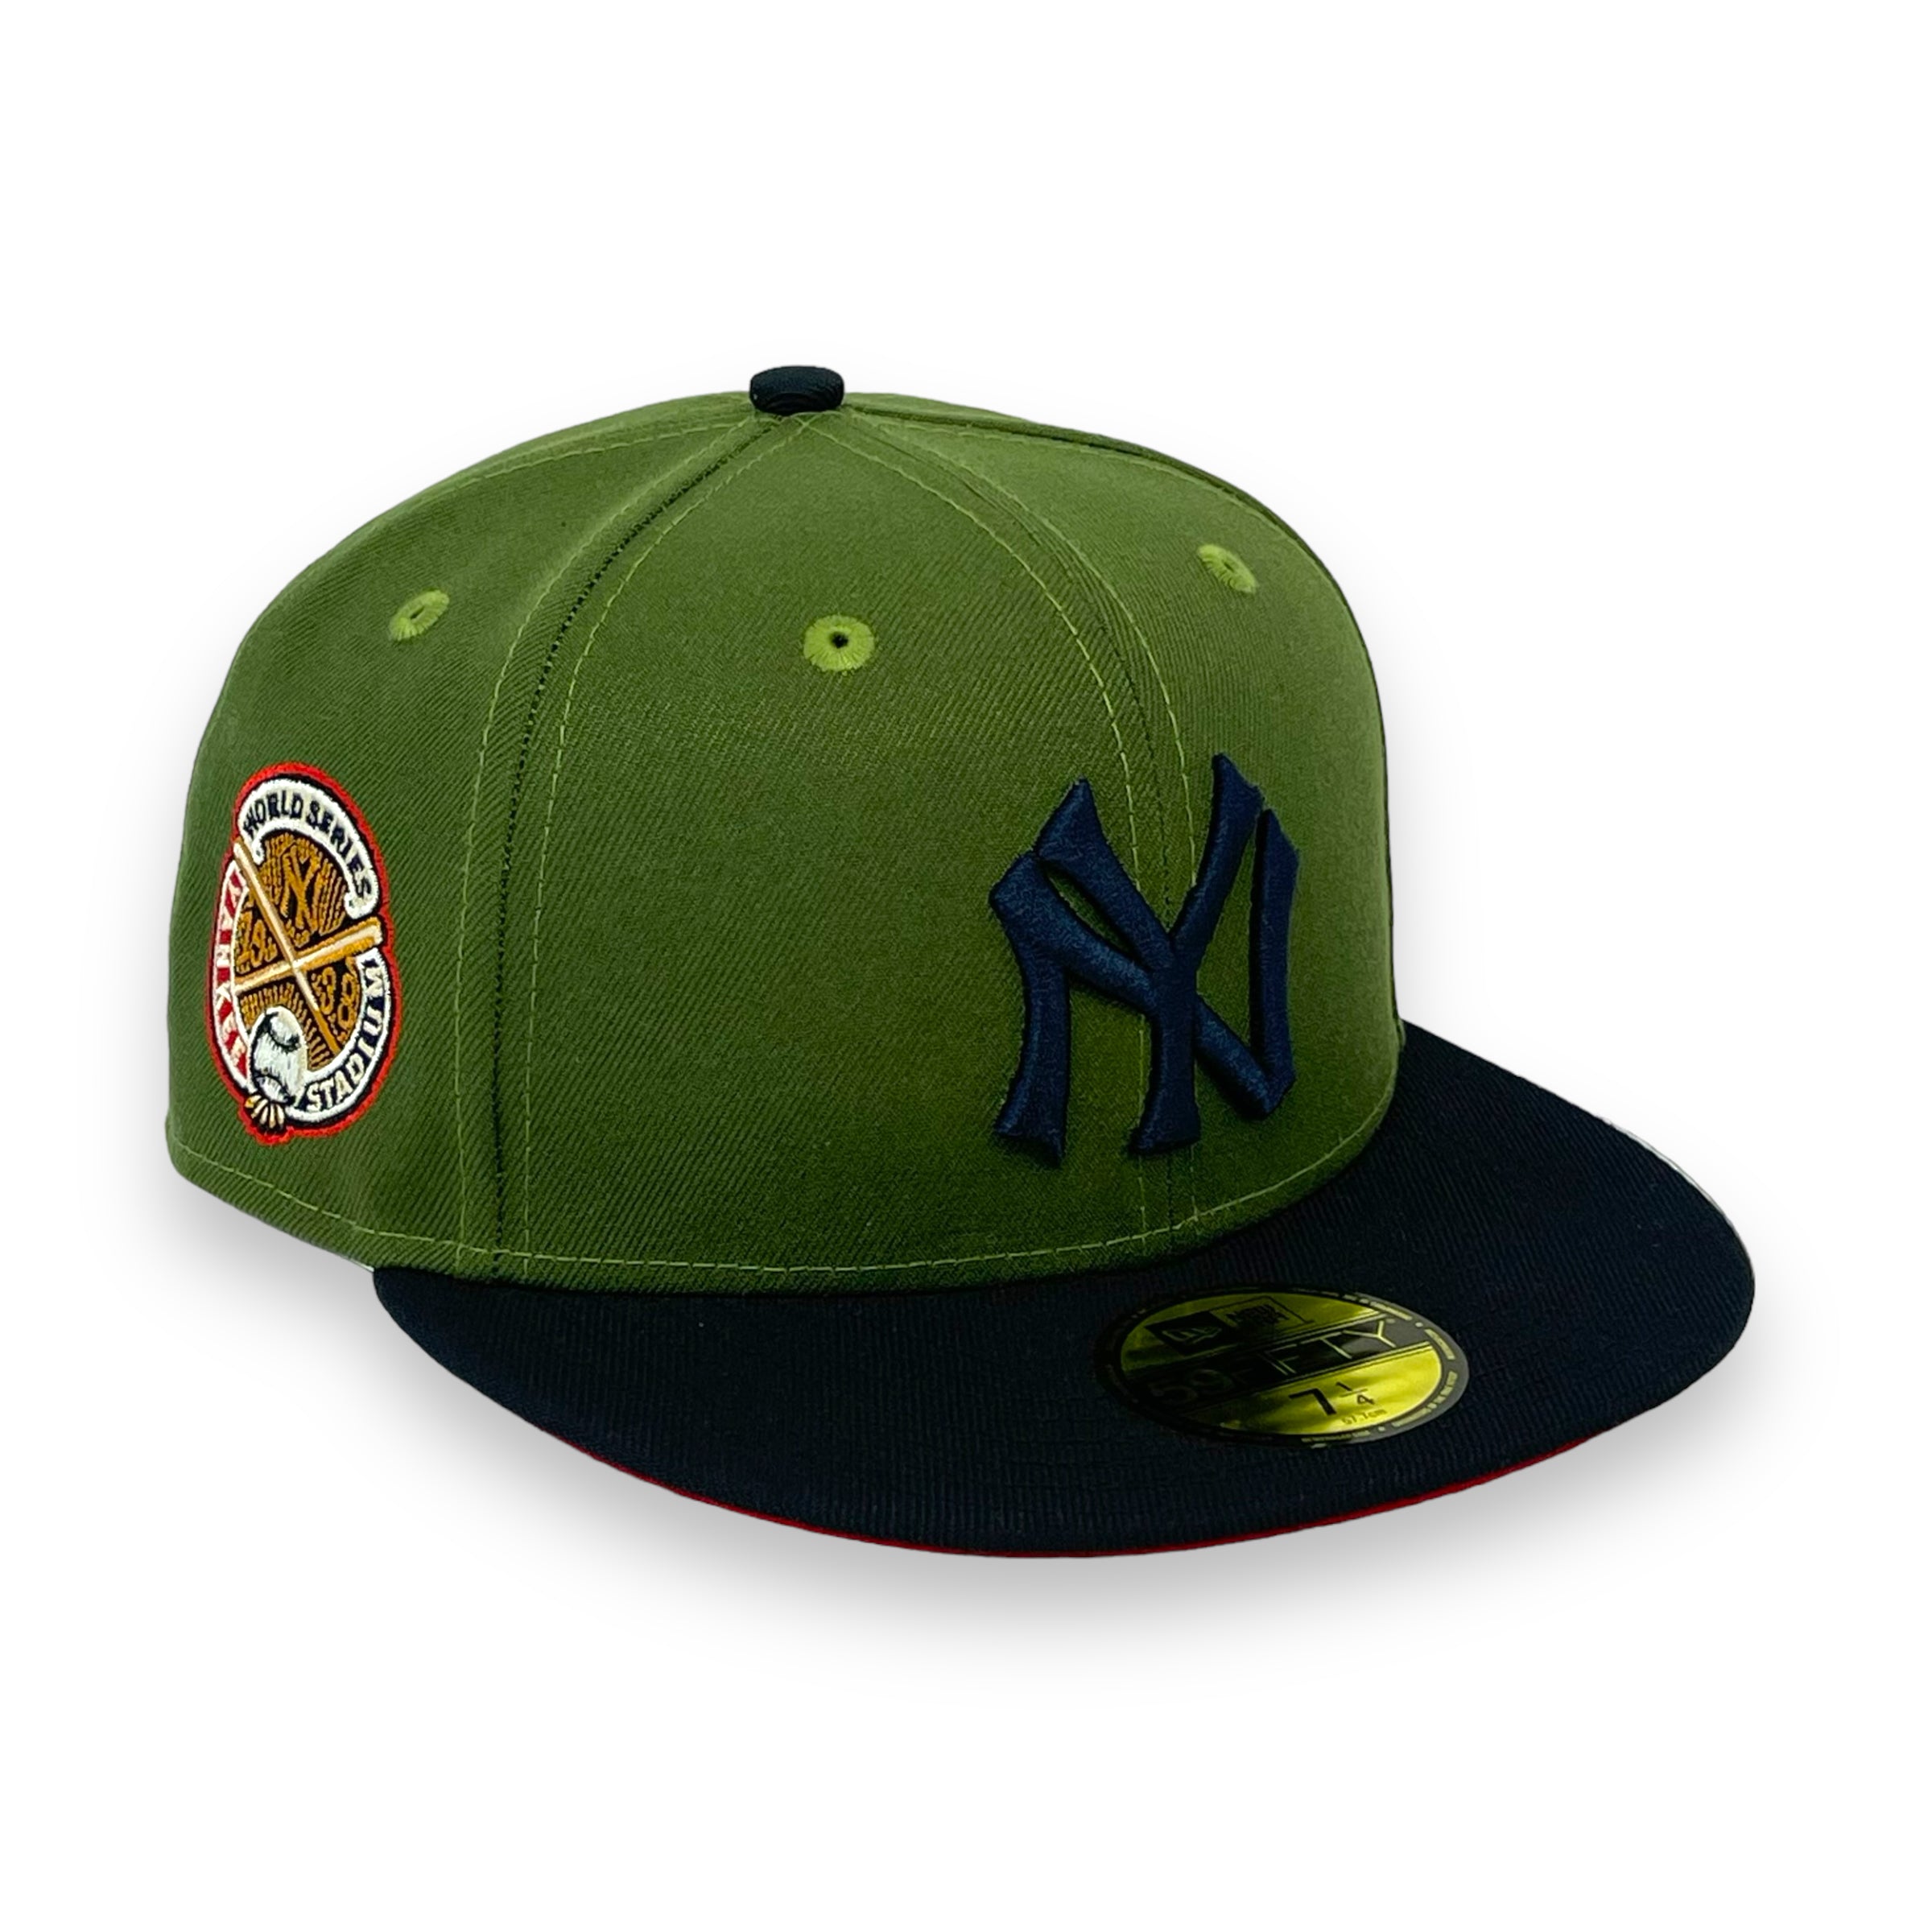 NEW YORK YANKEES (R-GREEN) (1938 WORLDSERIES) NEW ERA 59FIFTY FITTED (RED UNDER VISOR)